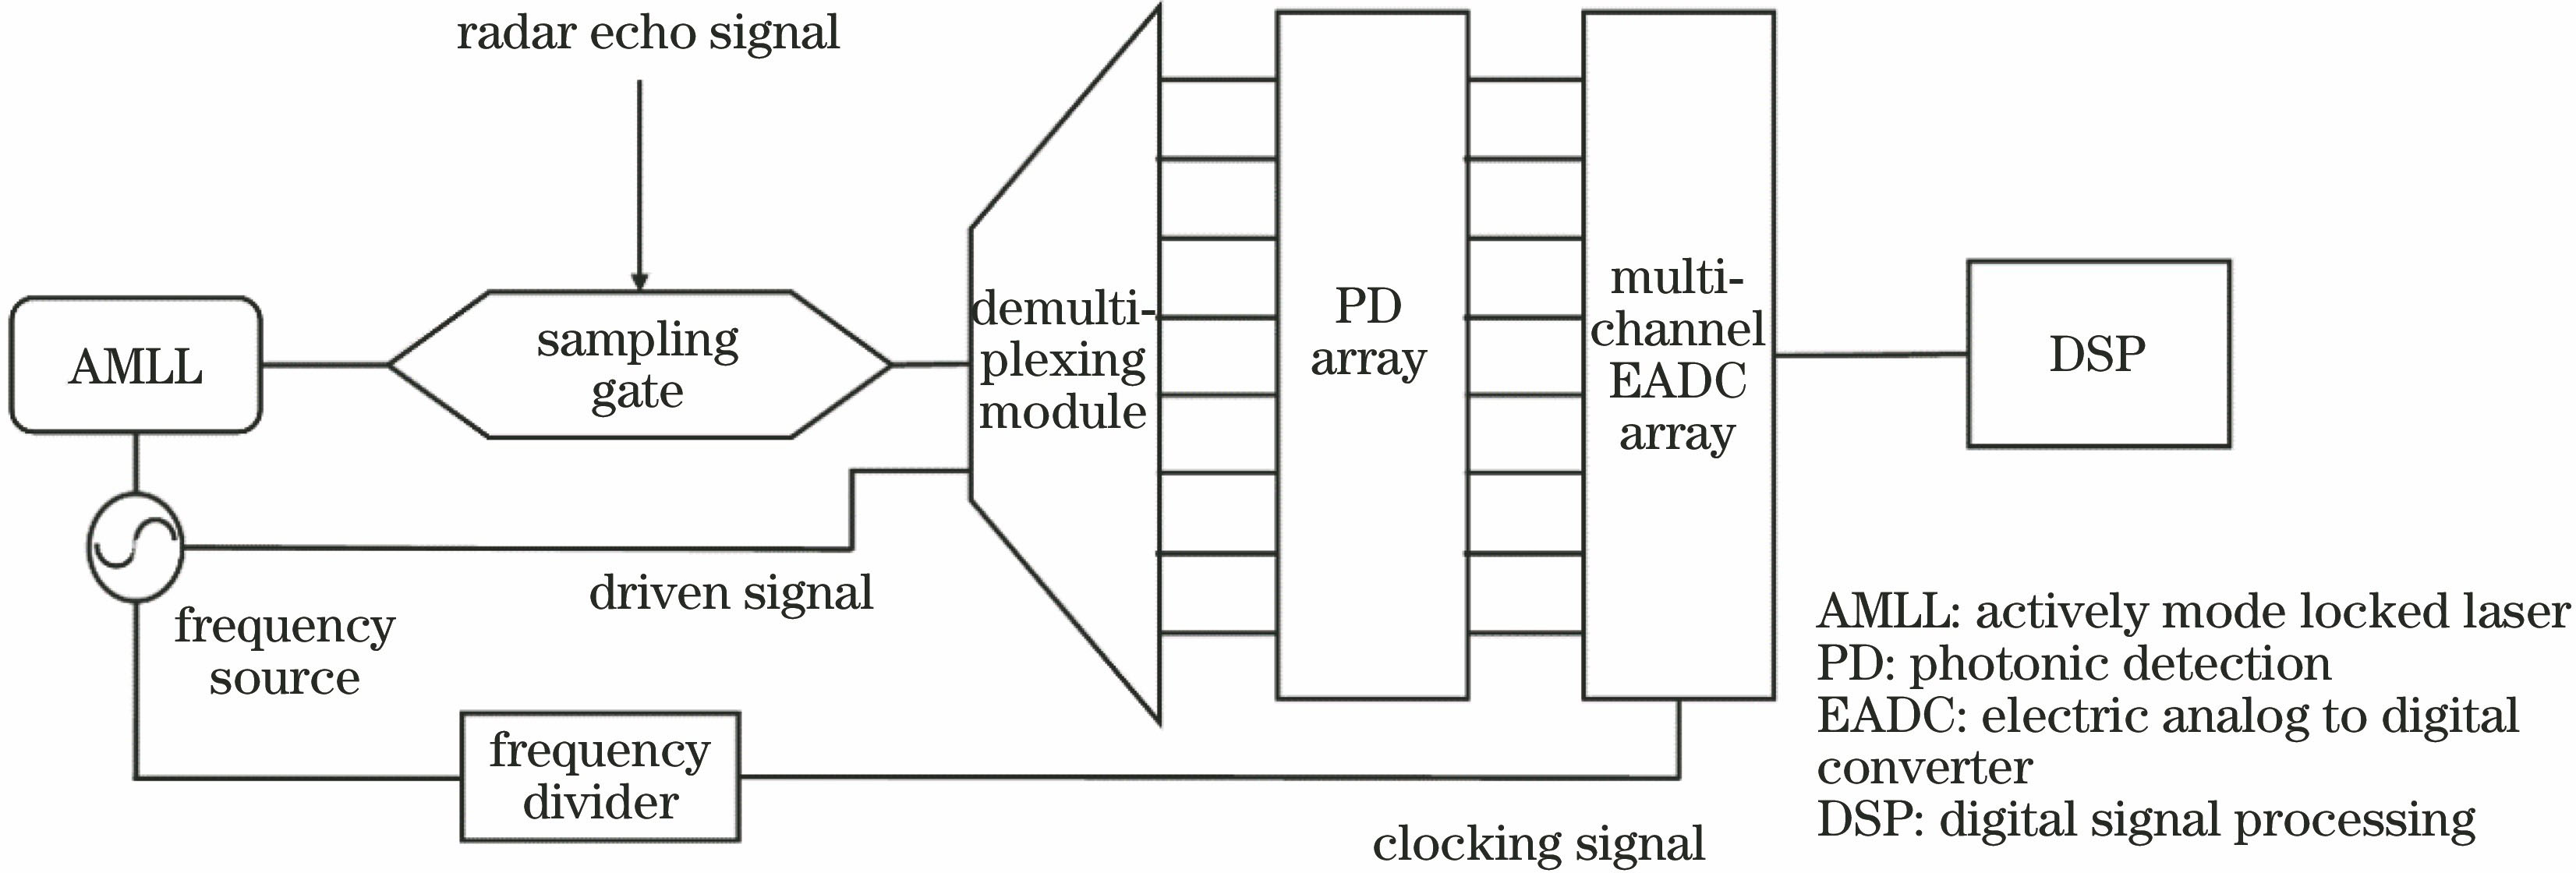 Schematic of multi-channel demultiplexing photonic analog-to-digital converter